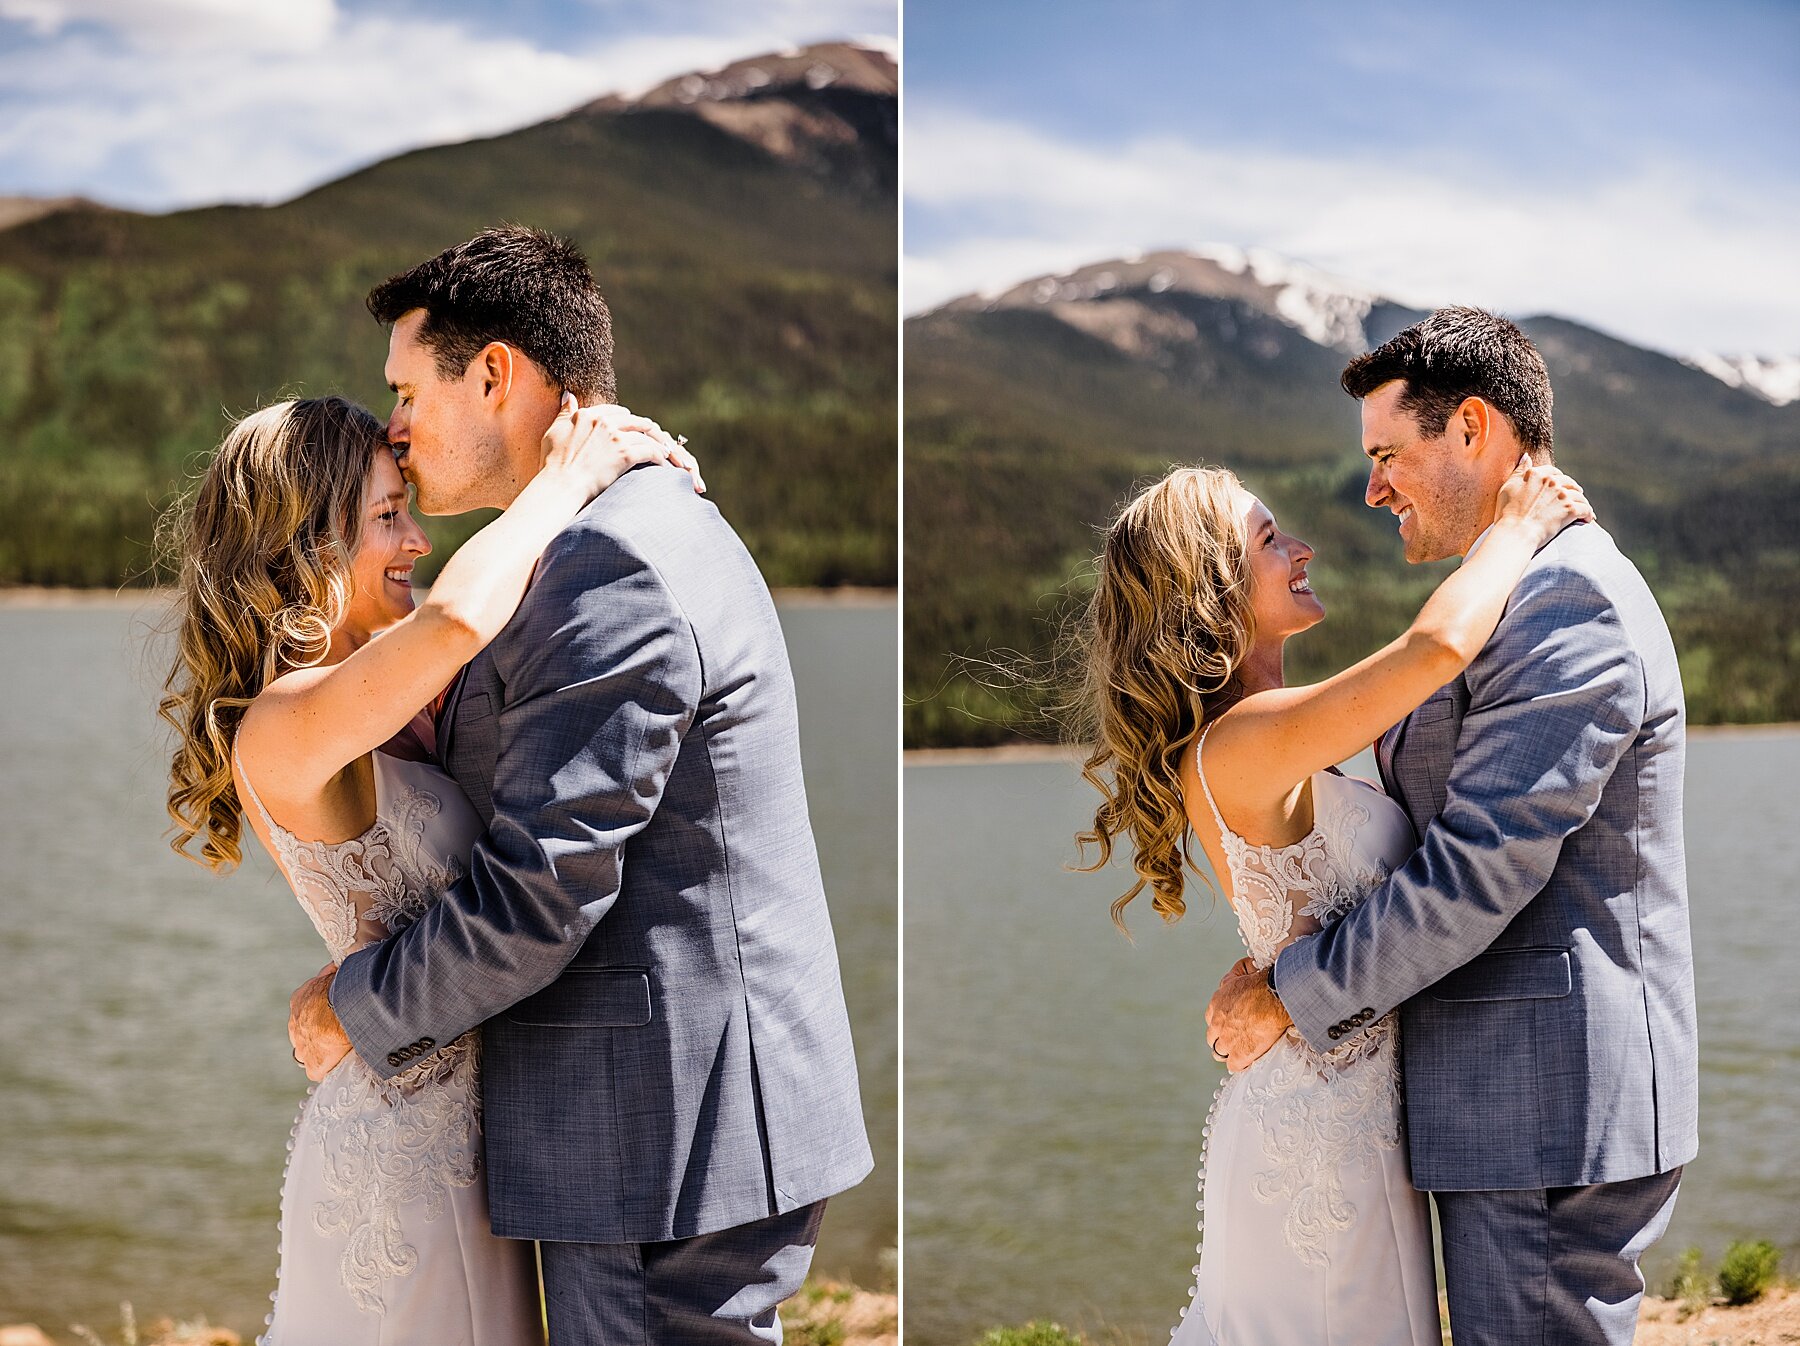 Tennessee Pass Cookhouse Elopement in Colorado | Vow of the Wild